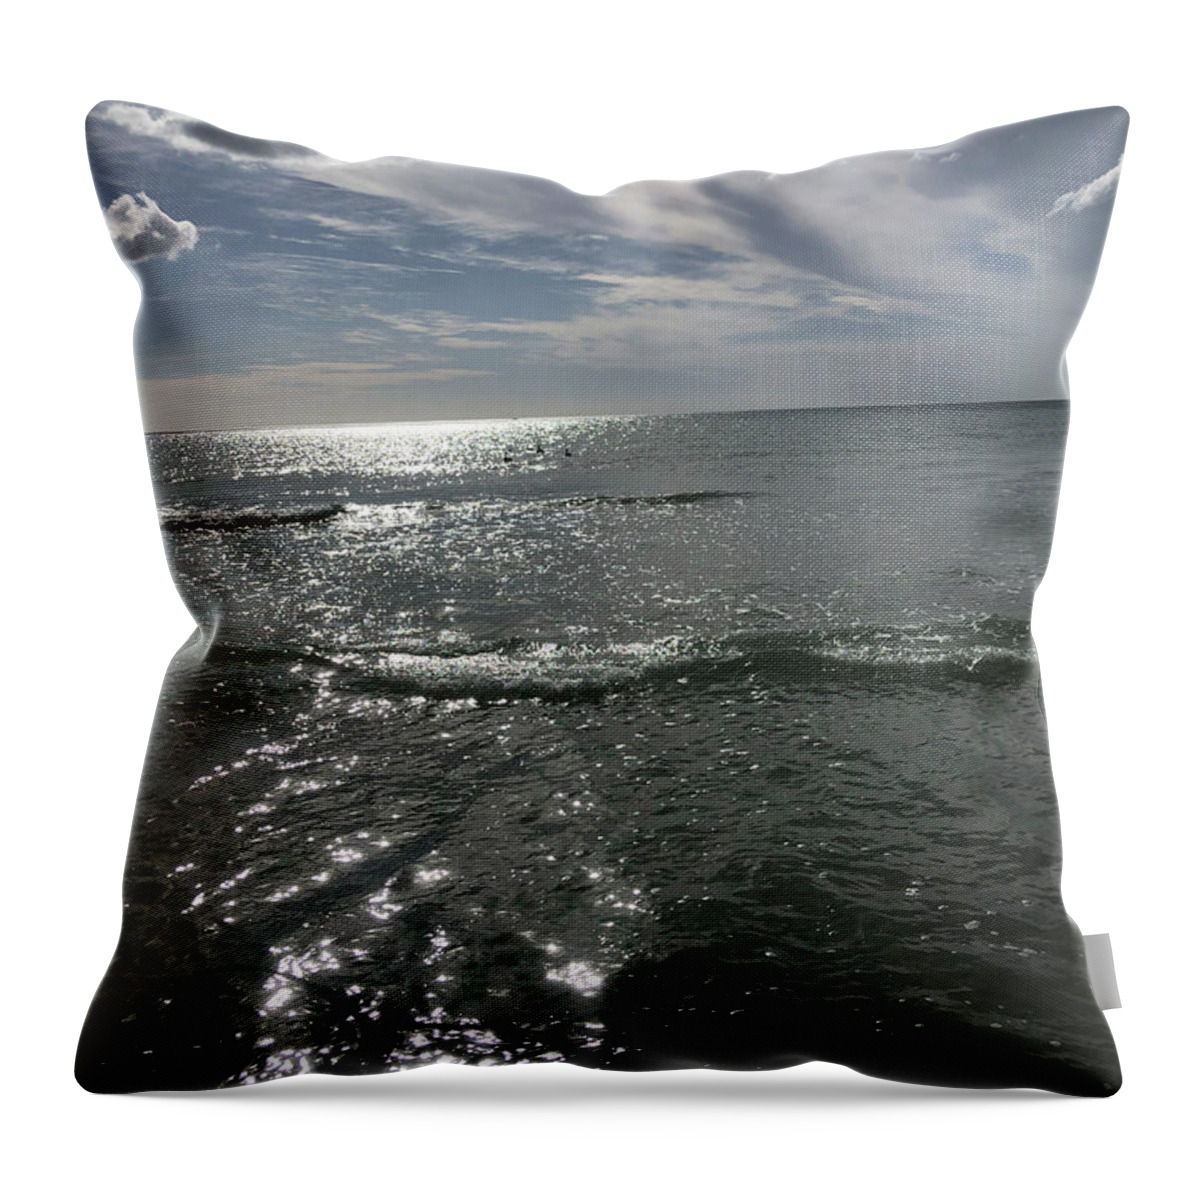 Photography Throw Pillow featuring the photograph Night on Lido Shore by Medge Jaspan